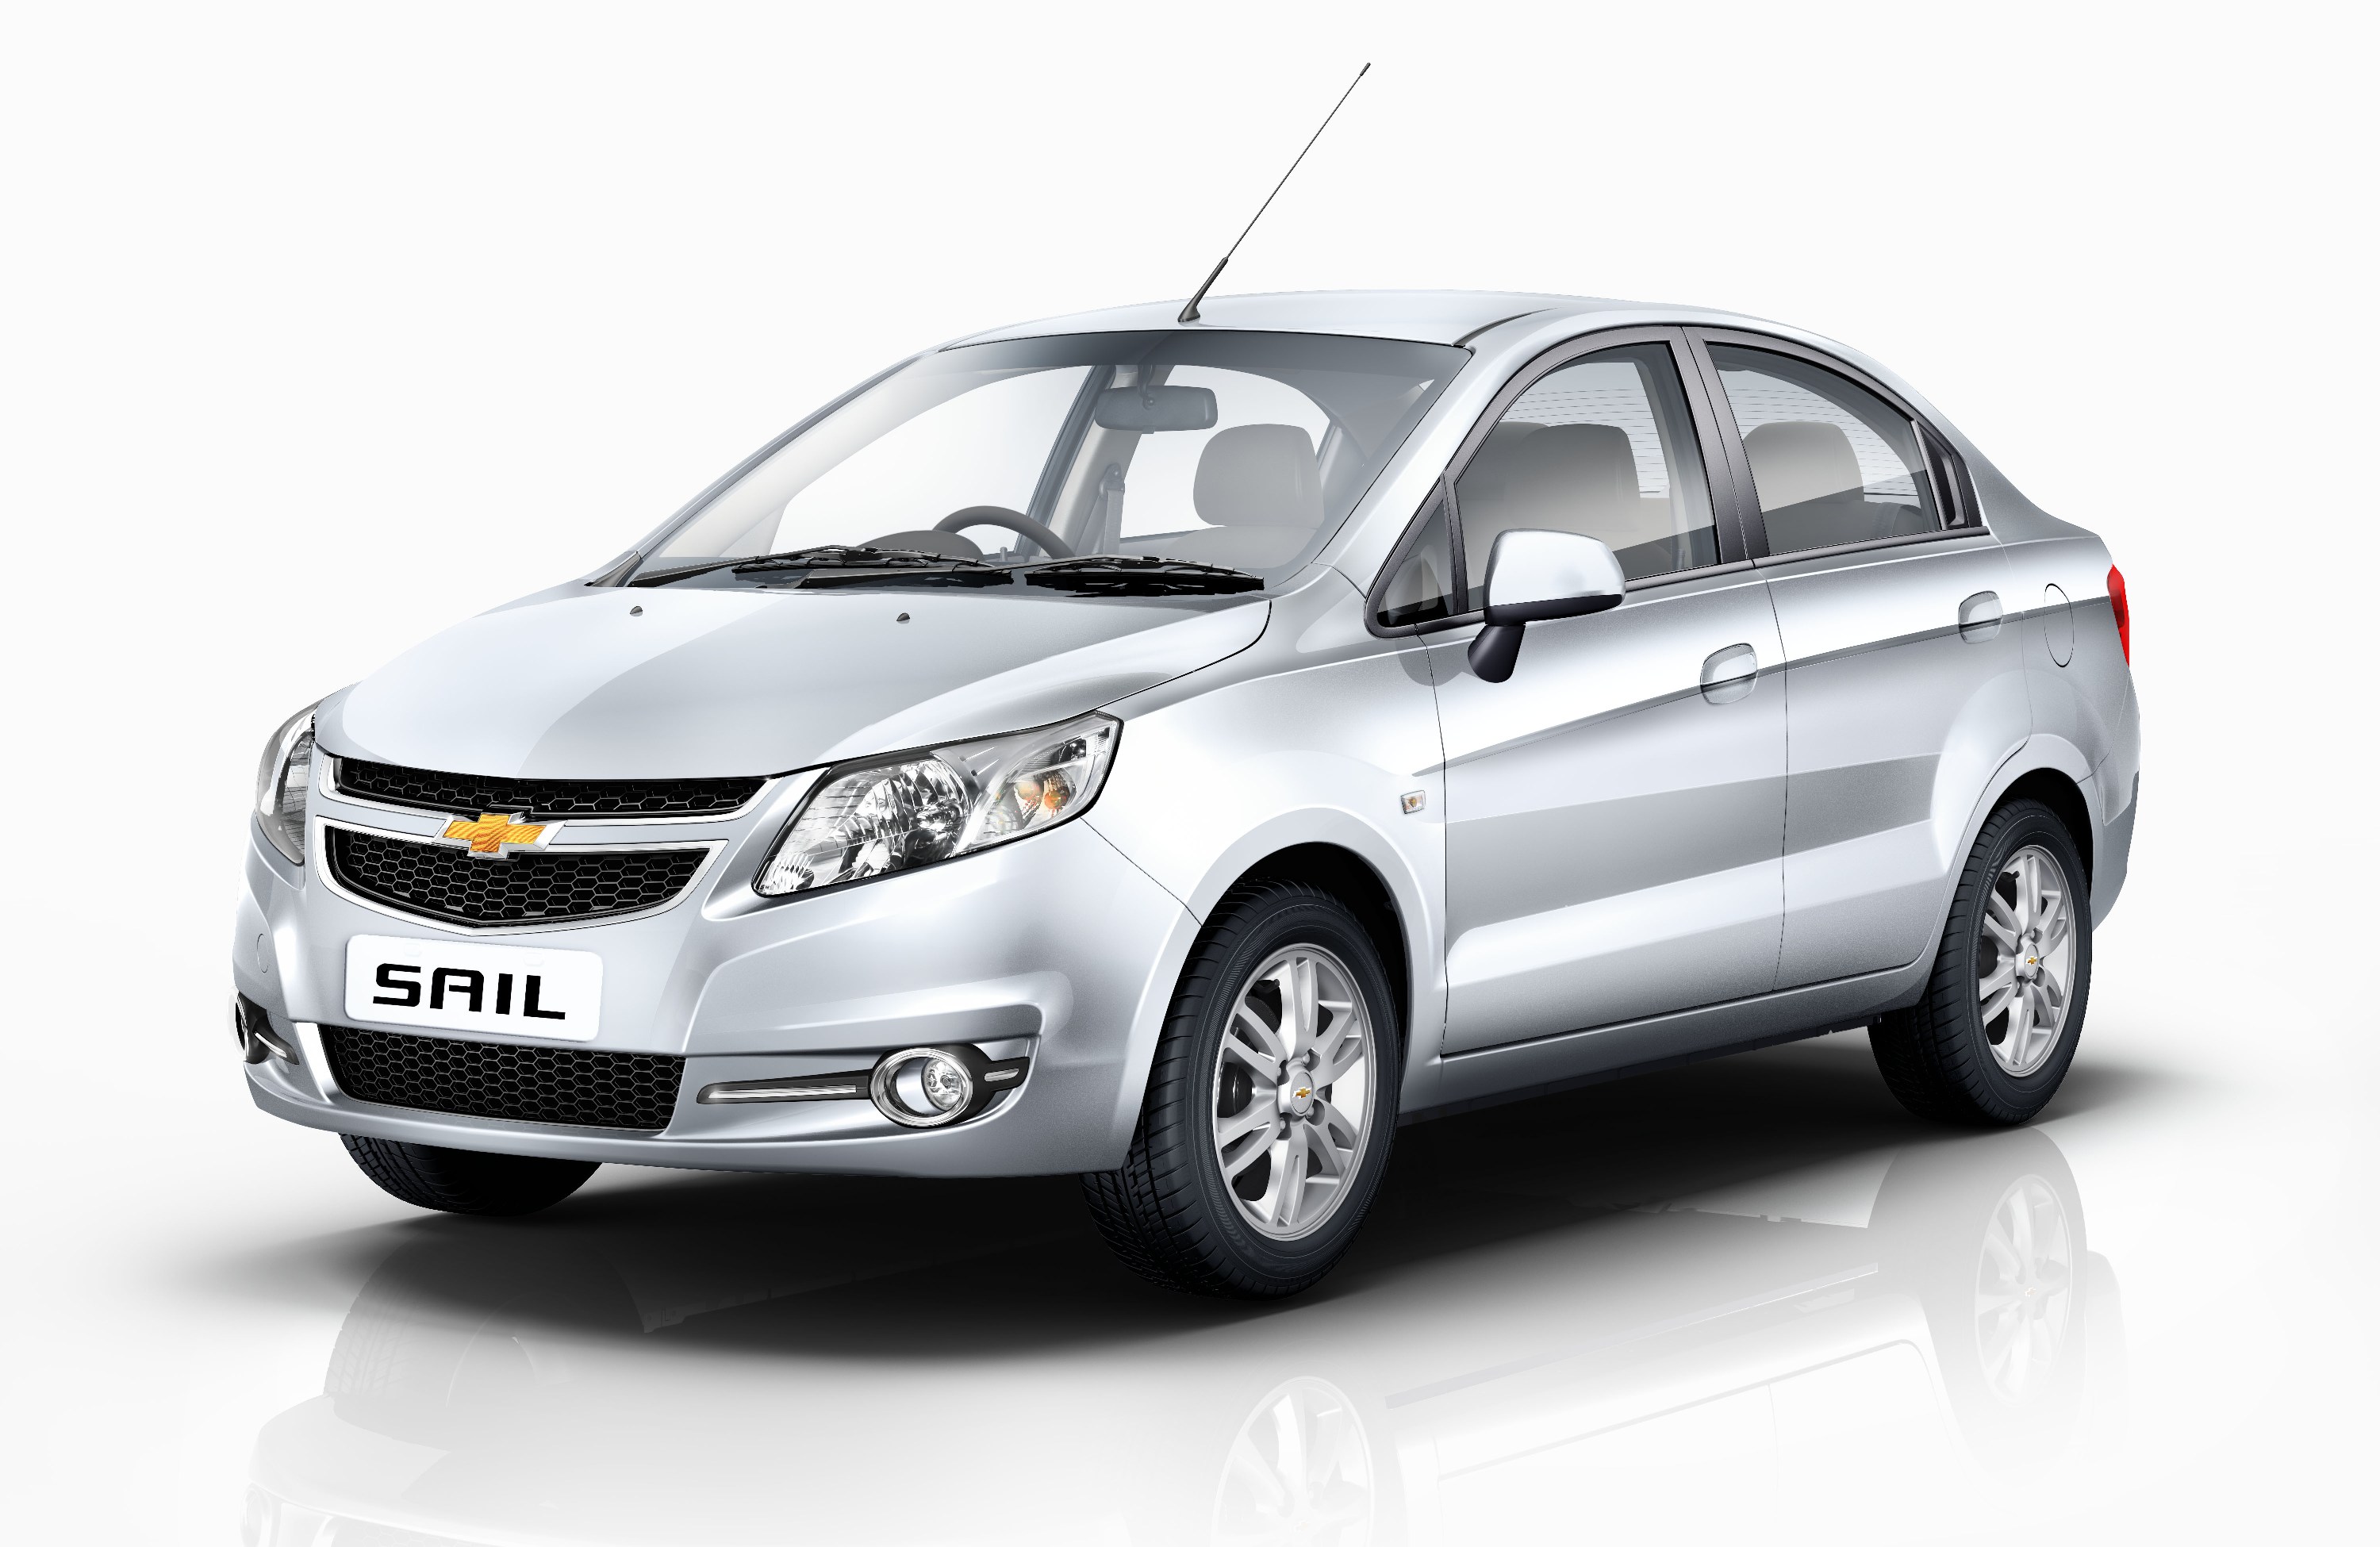 Revised Chevrolet Sail twins now on sale